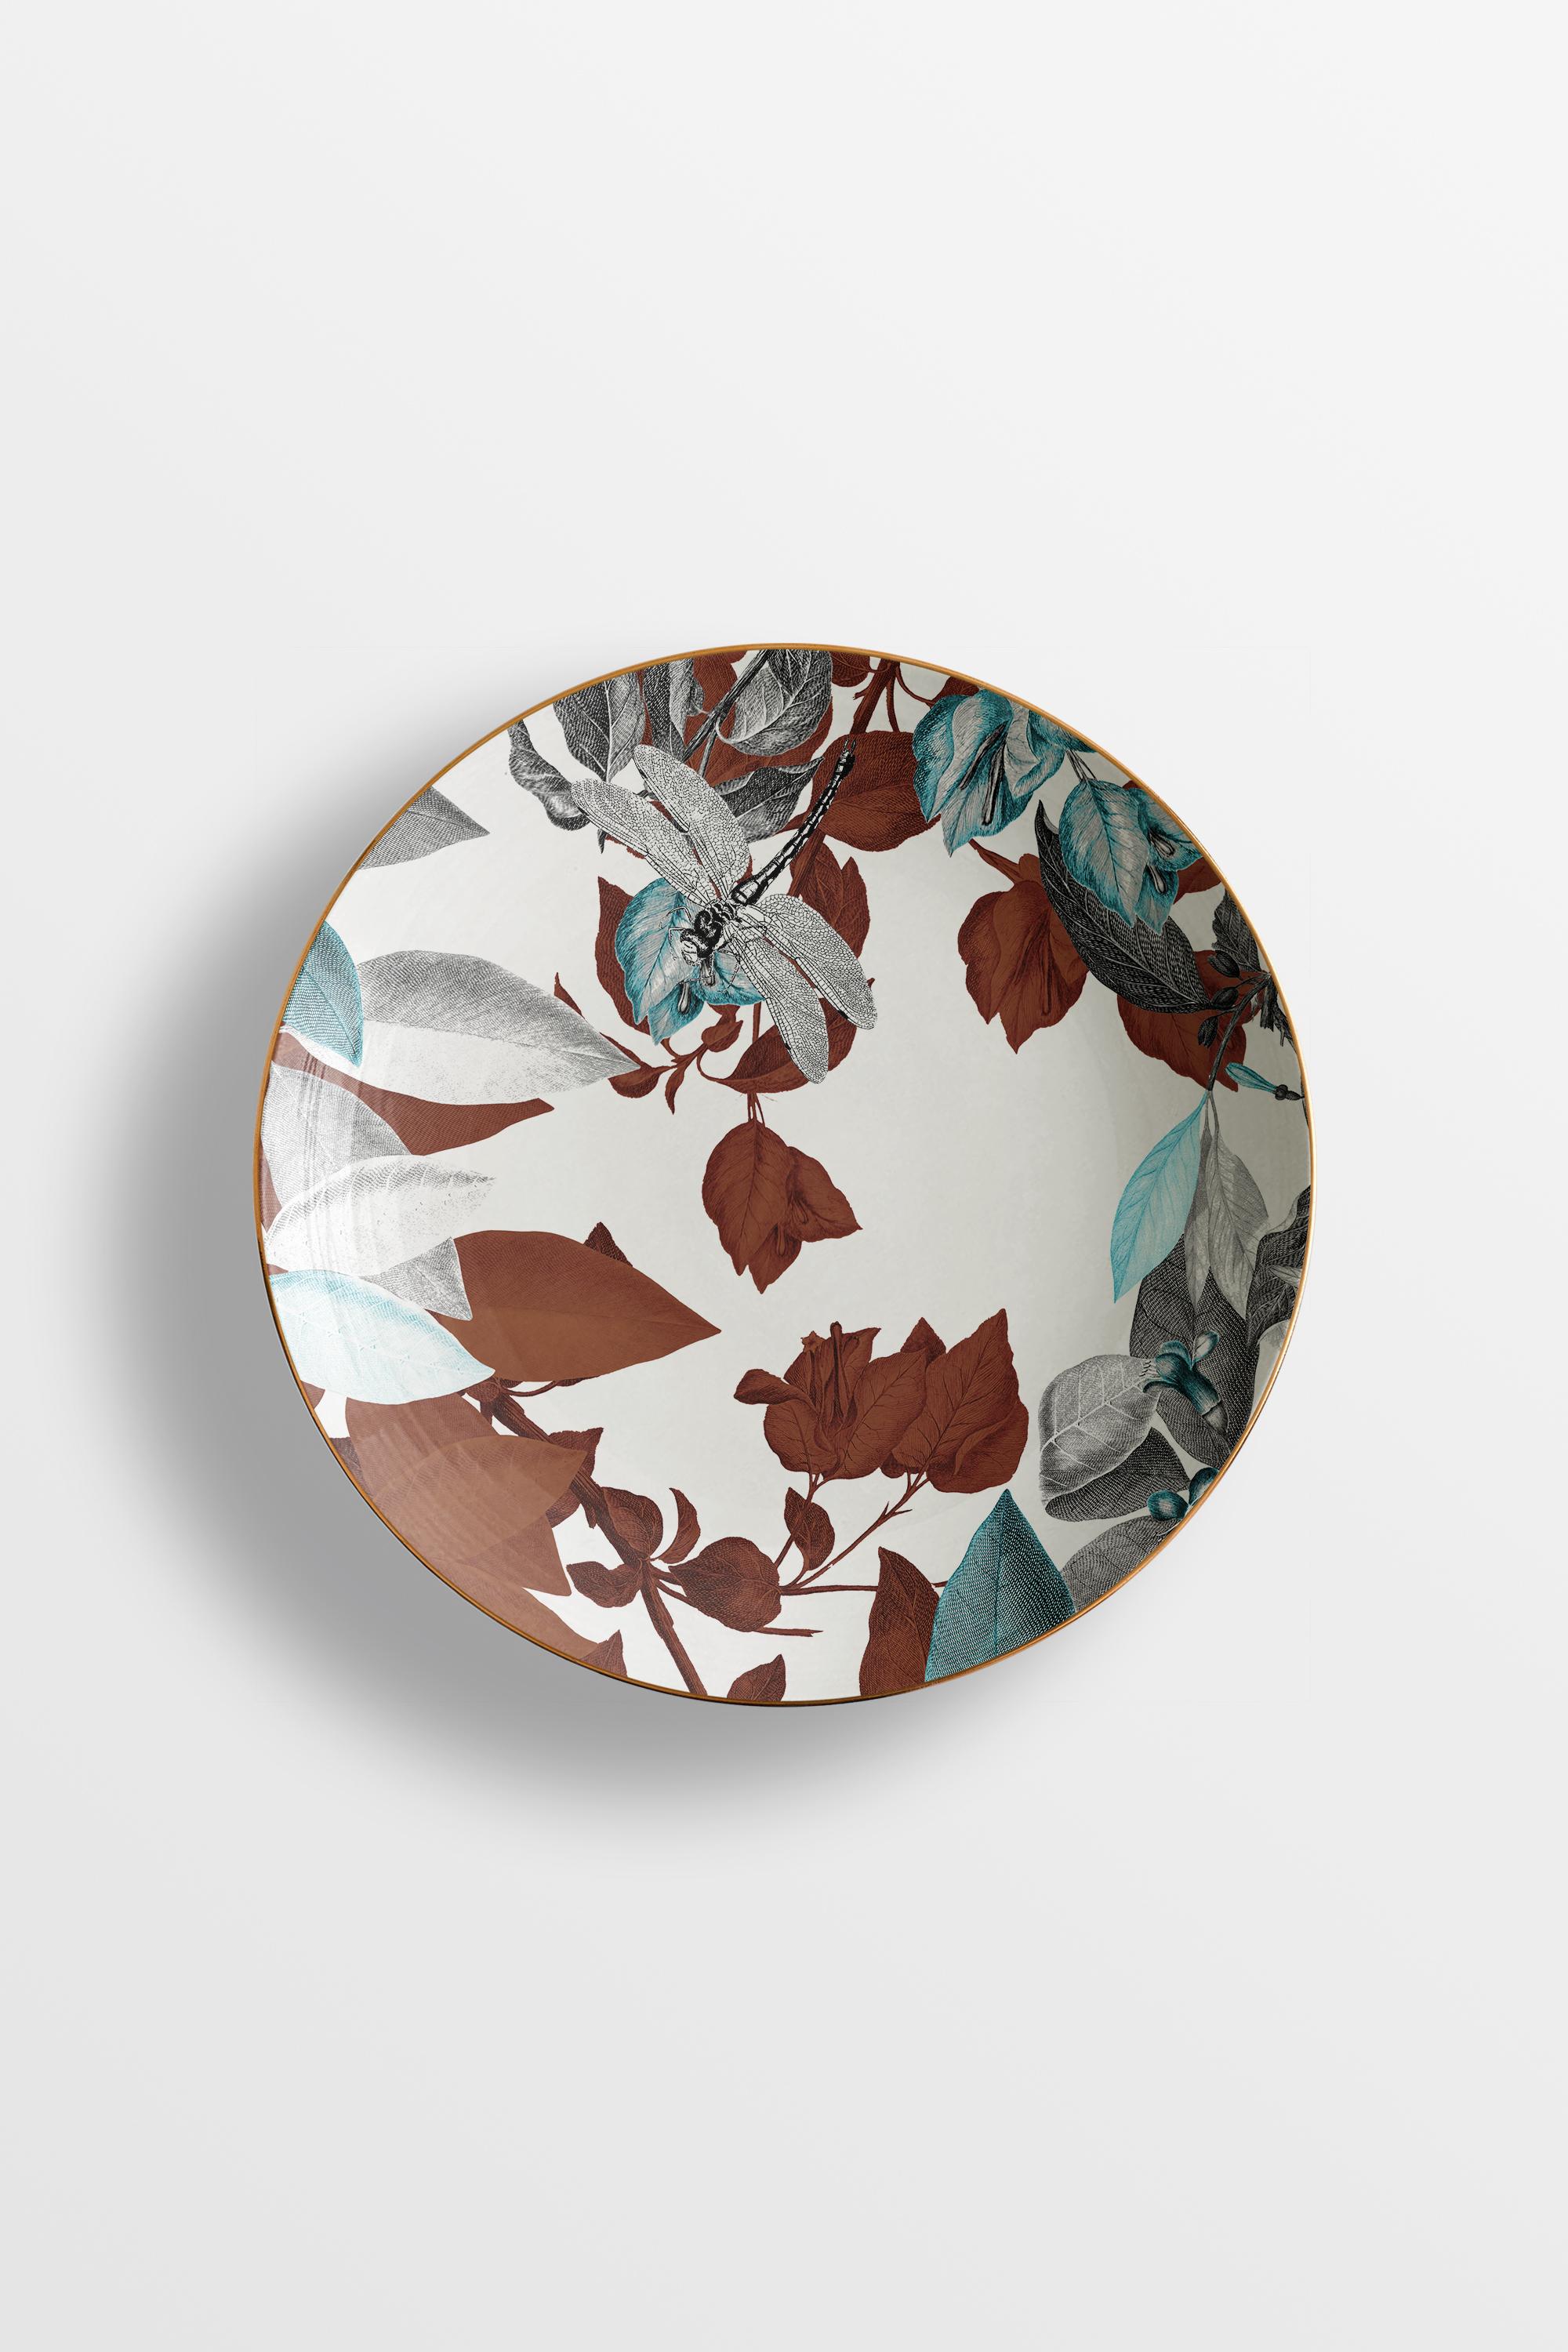 Black dragon pool is a collection of plates and vases inspired by the famous Chinese pond of the same name, located in the scenic Jade Spring Park. The designs in this collection feature dragonflies drawn in black and white flying and resting on a